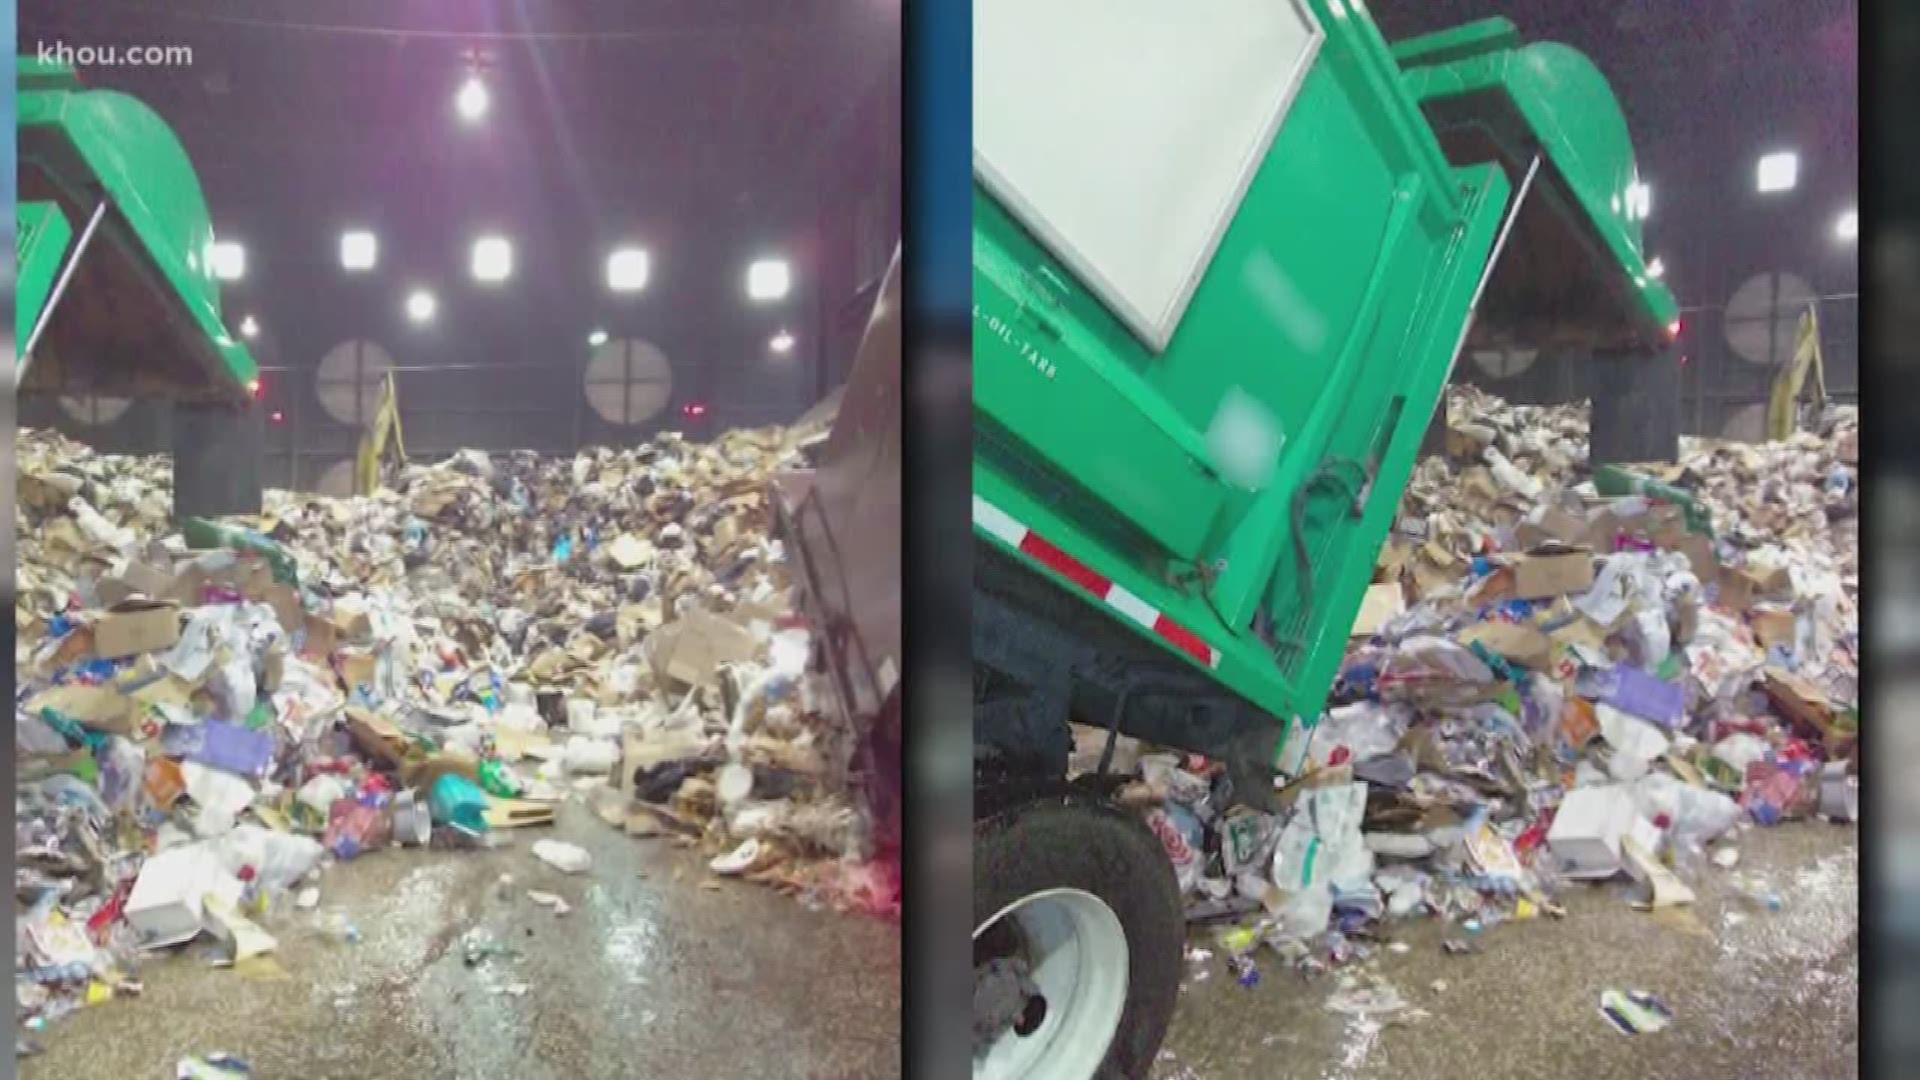 A city employee is sharing photos and videos he said are of entire loads of recyclable-only materials that were dumped at city garbage facilities and later sent to the landfill.